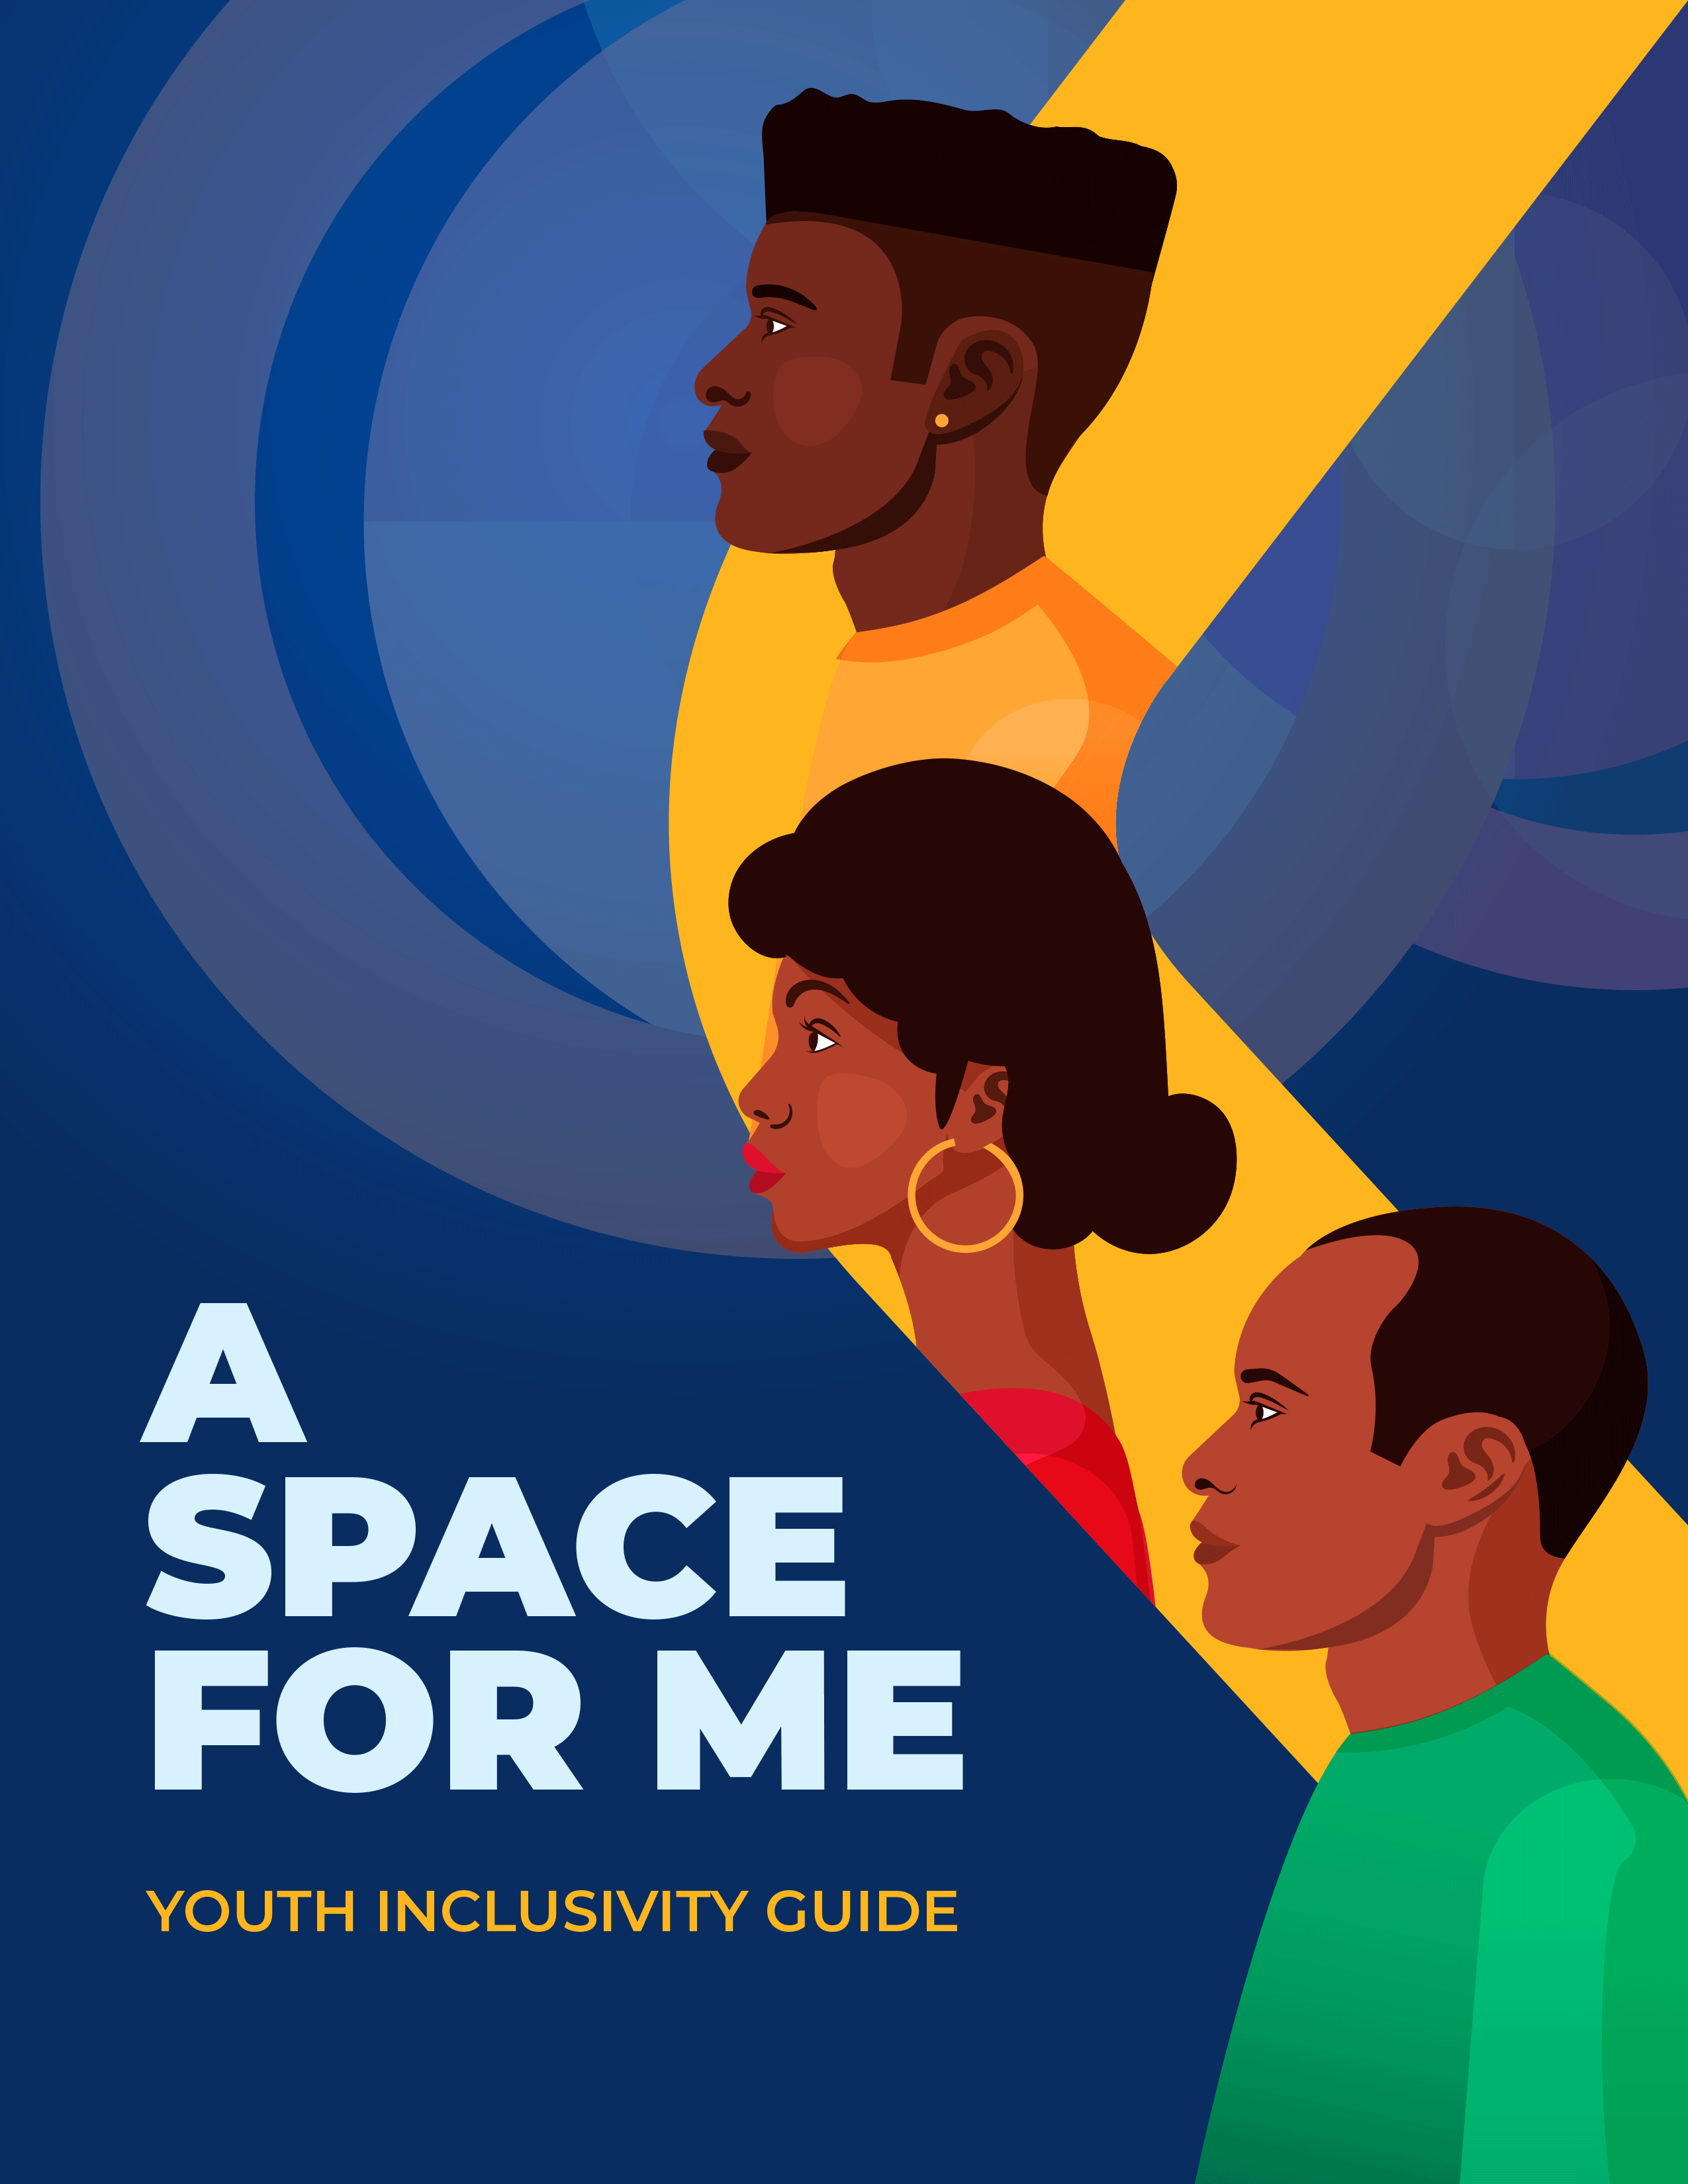 A Space for Me Youth Inclusivity Guide